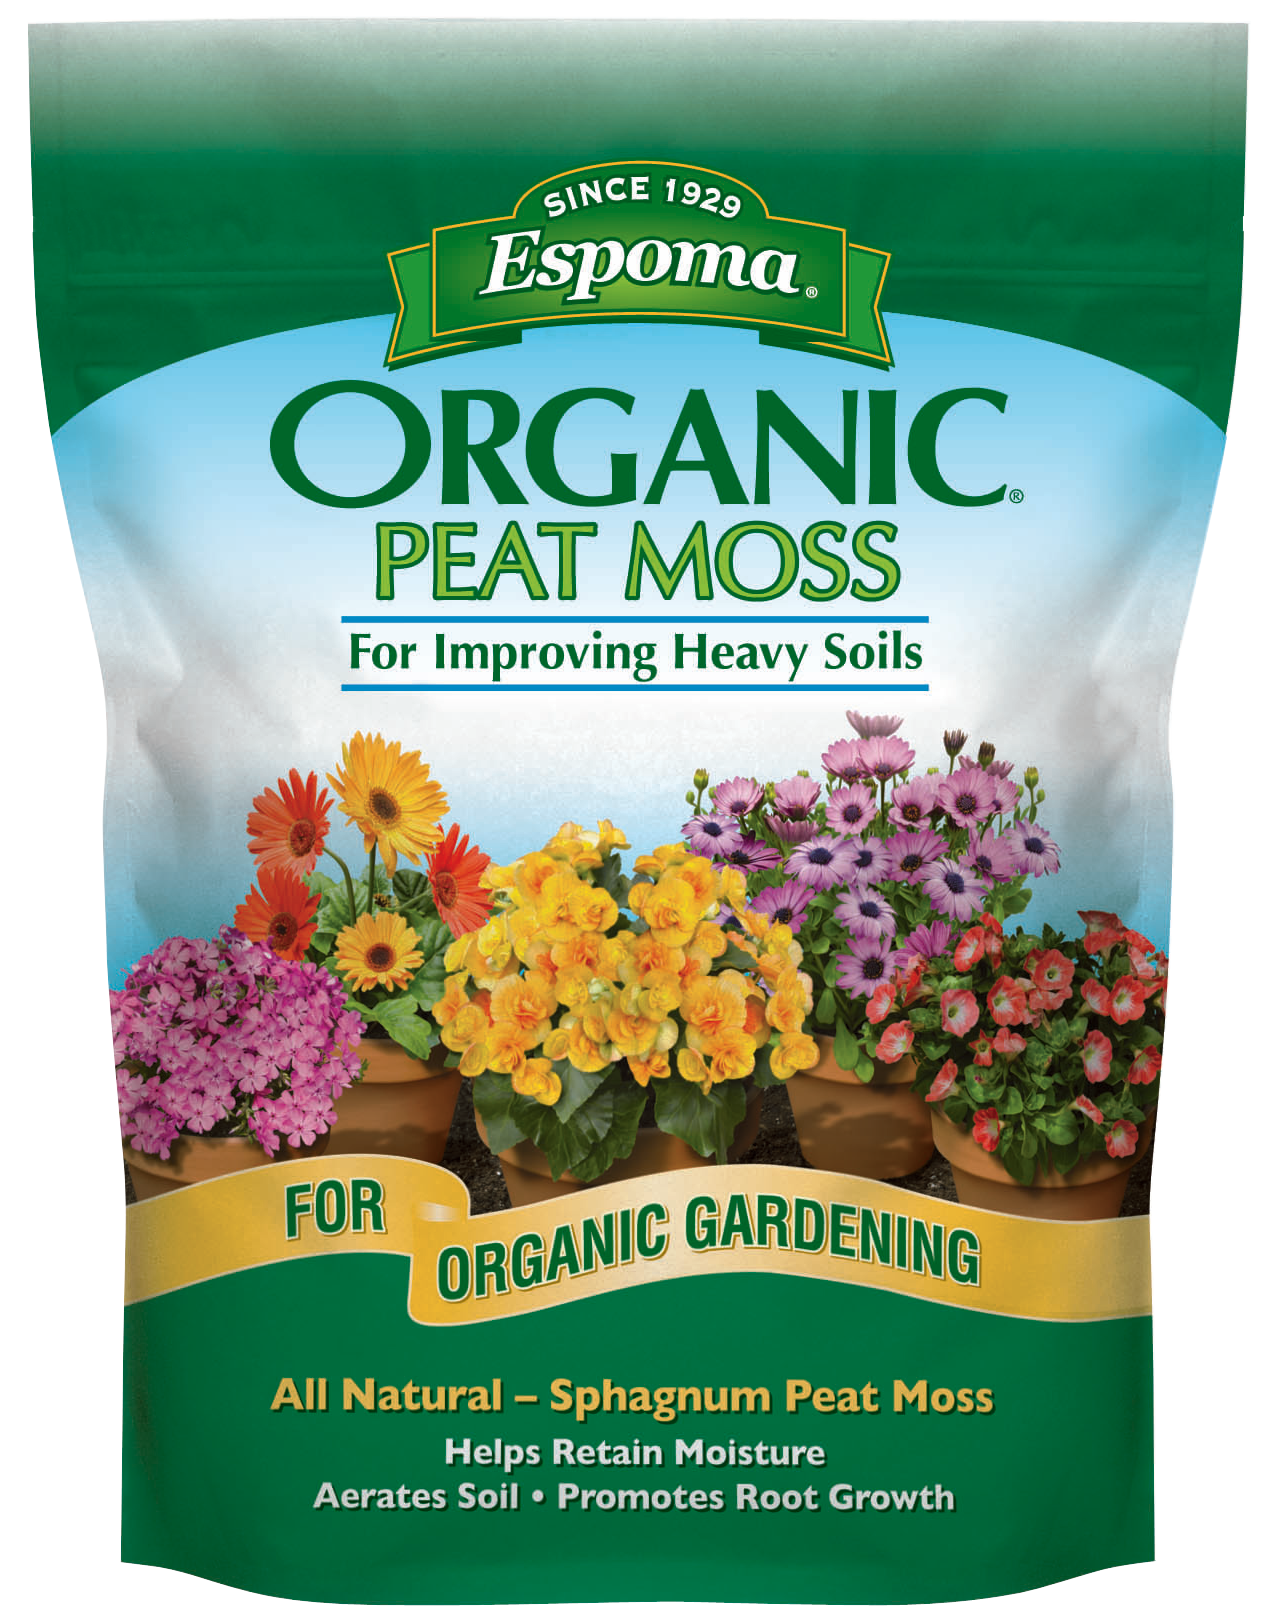 What is Sphagnum Peat Moss and How Do I Use It?